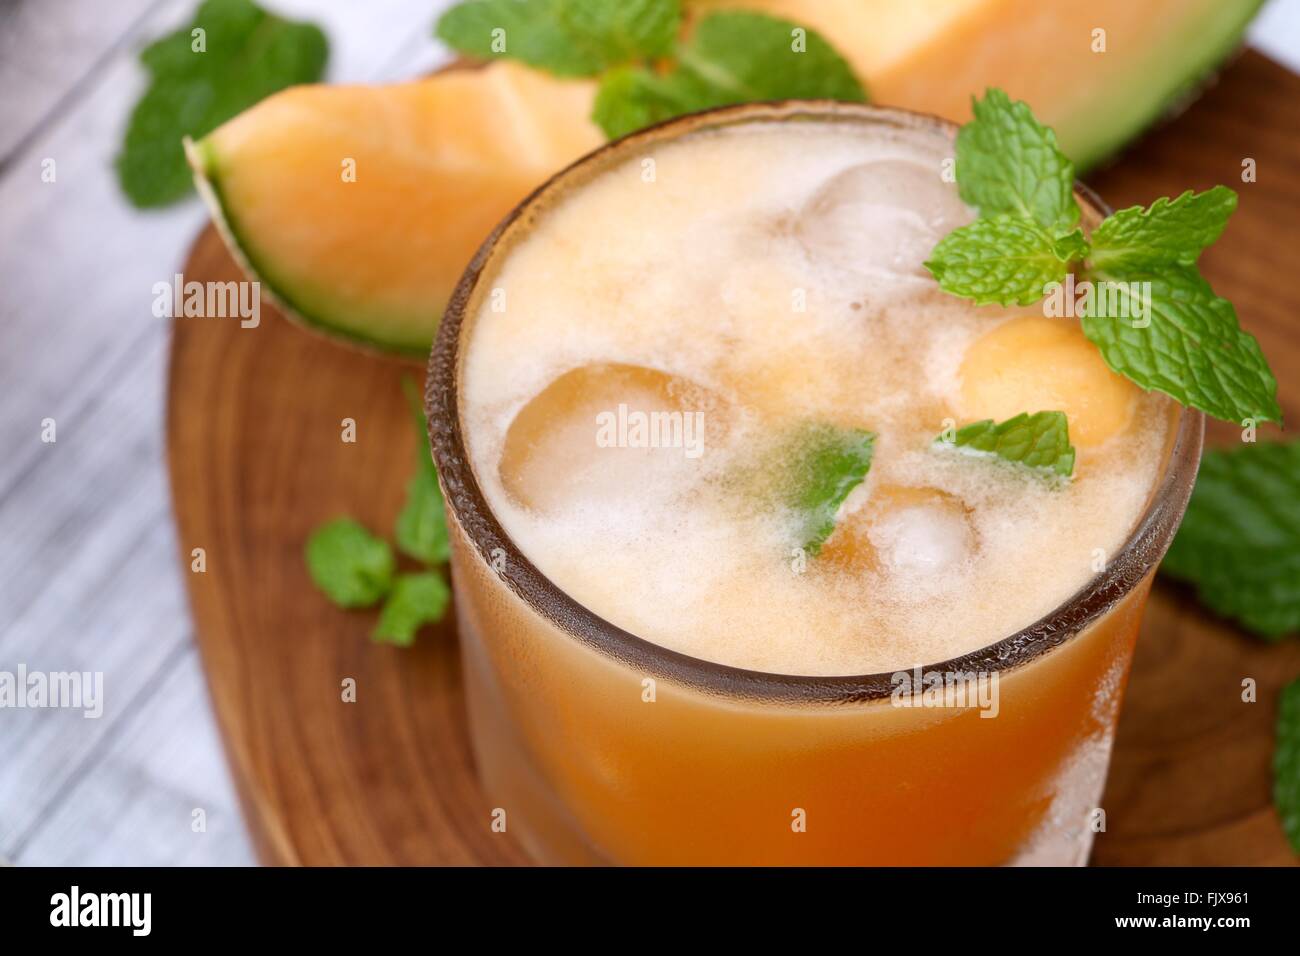 Fresh cantaloupe melon juice with ice cubes; garnished with mint leaves and cantaloupe wedges. Stock Photo